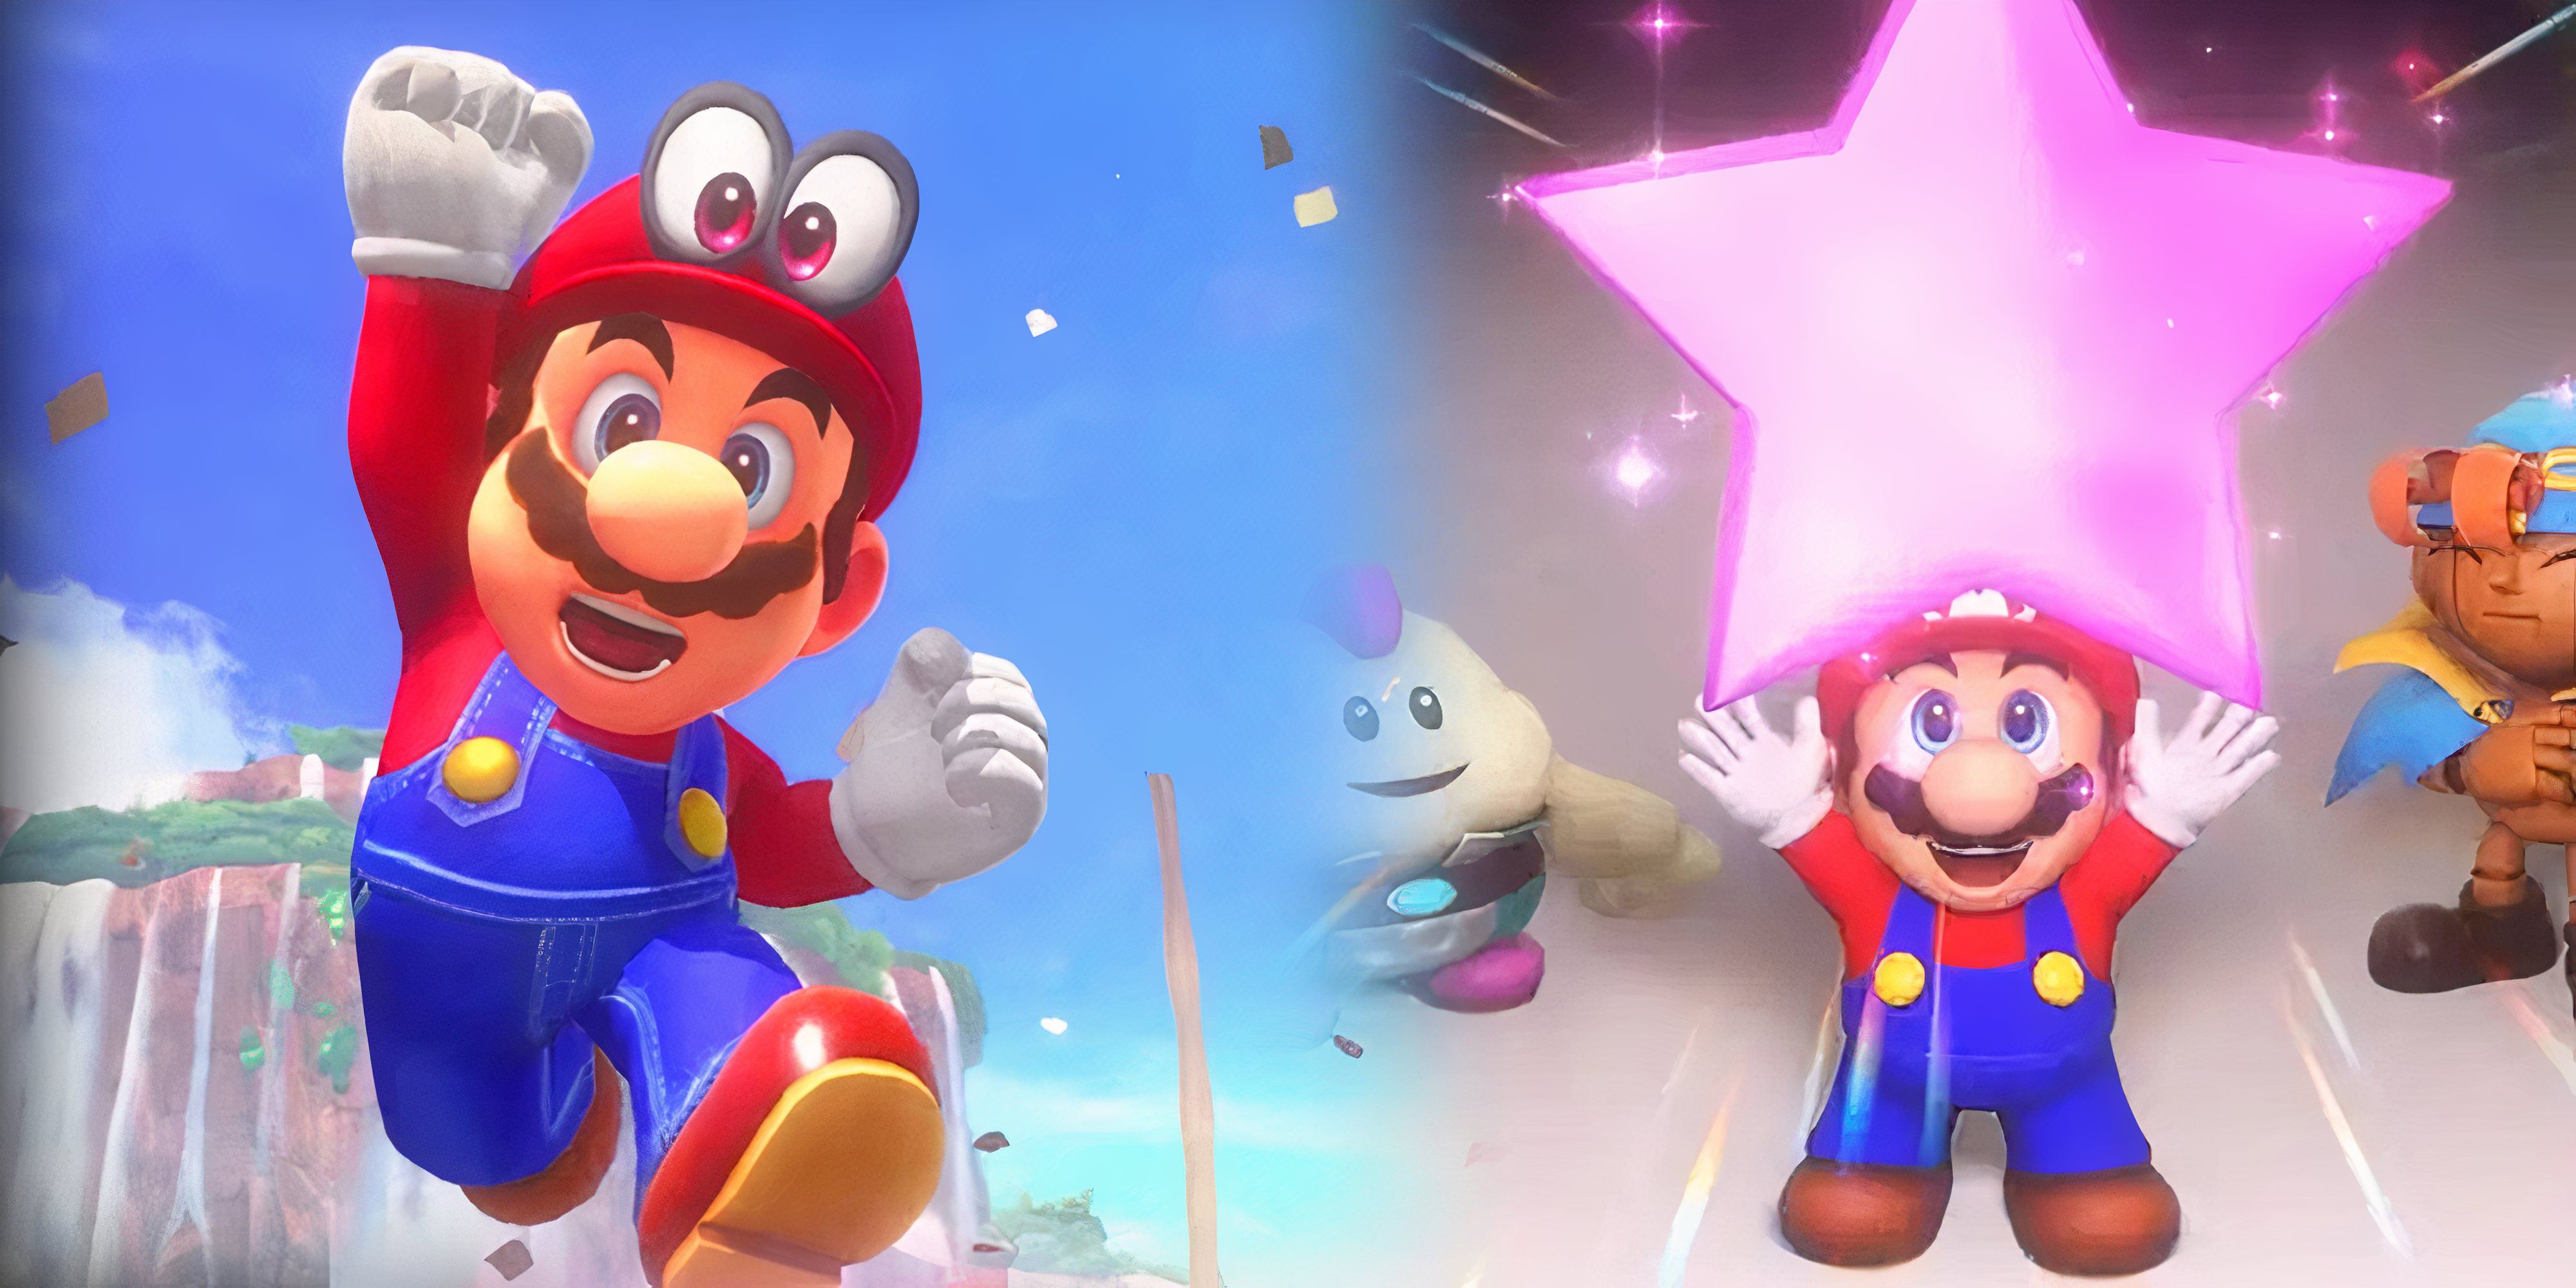 mario in super mario odyssey, and holding up a star in super mario rpg